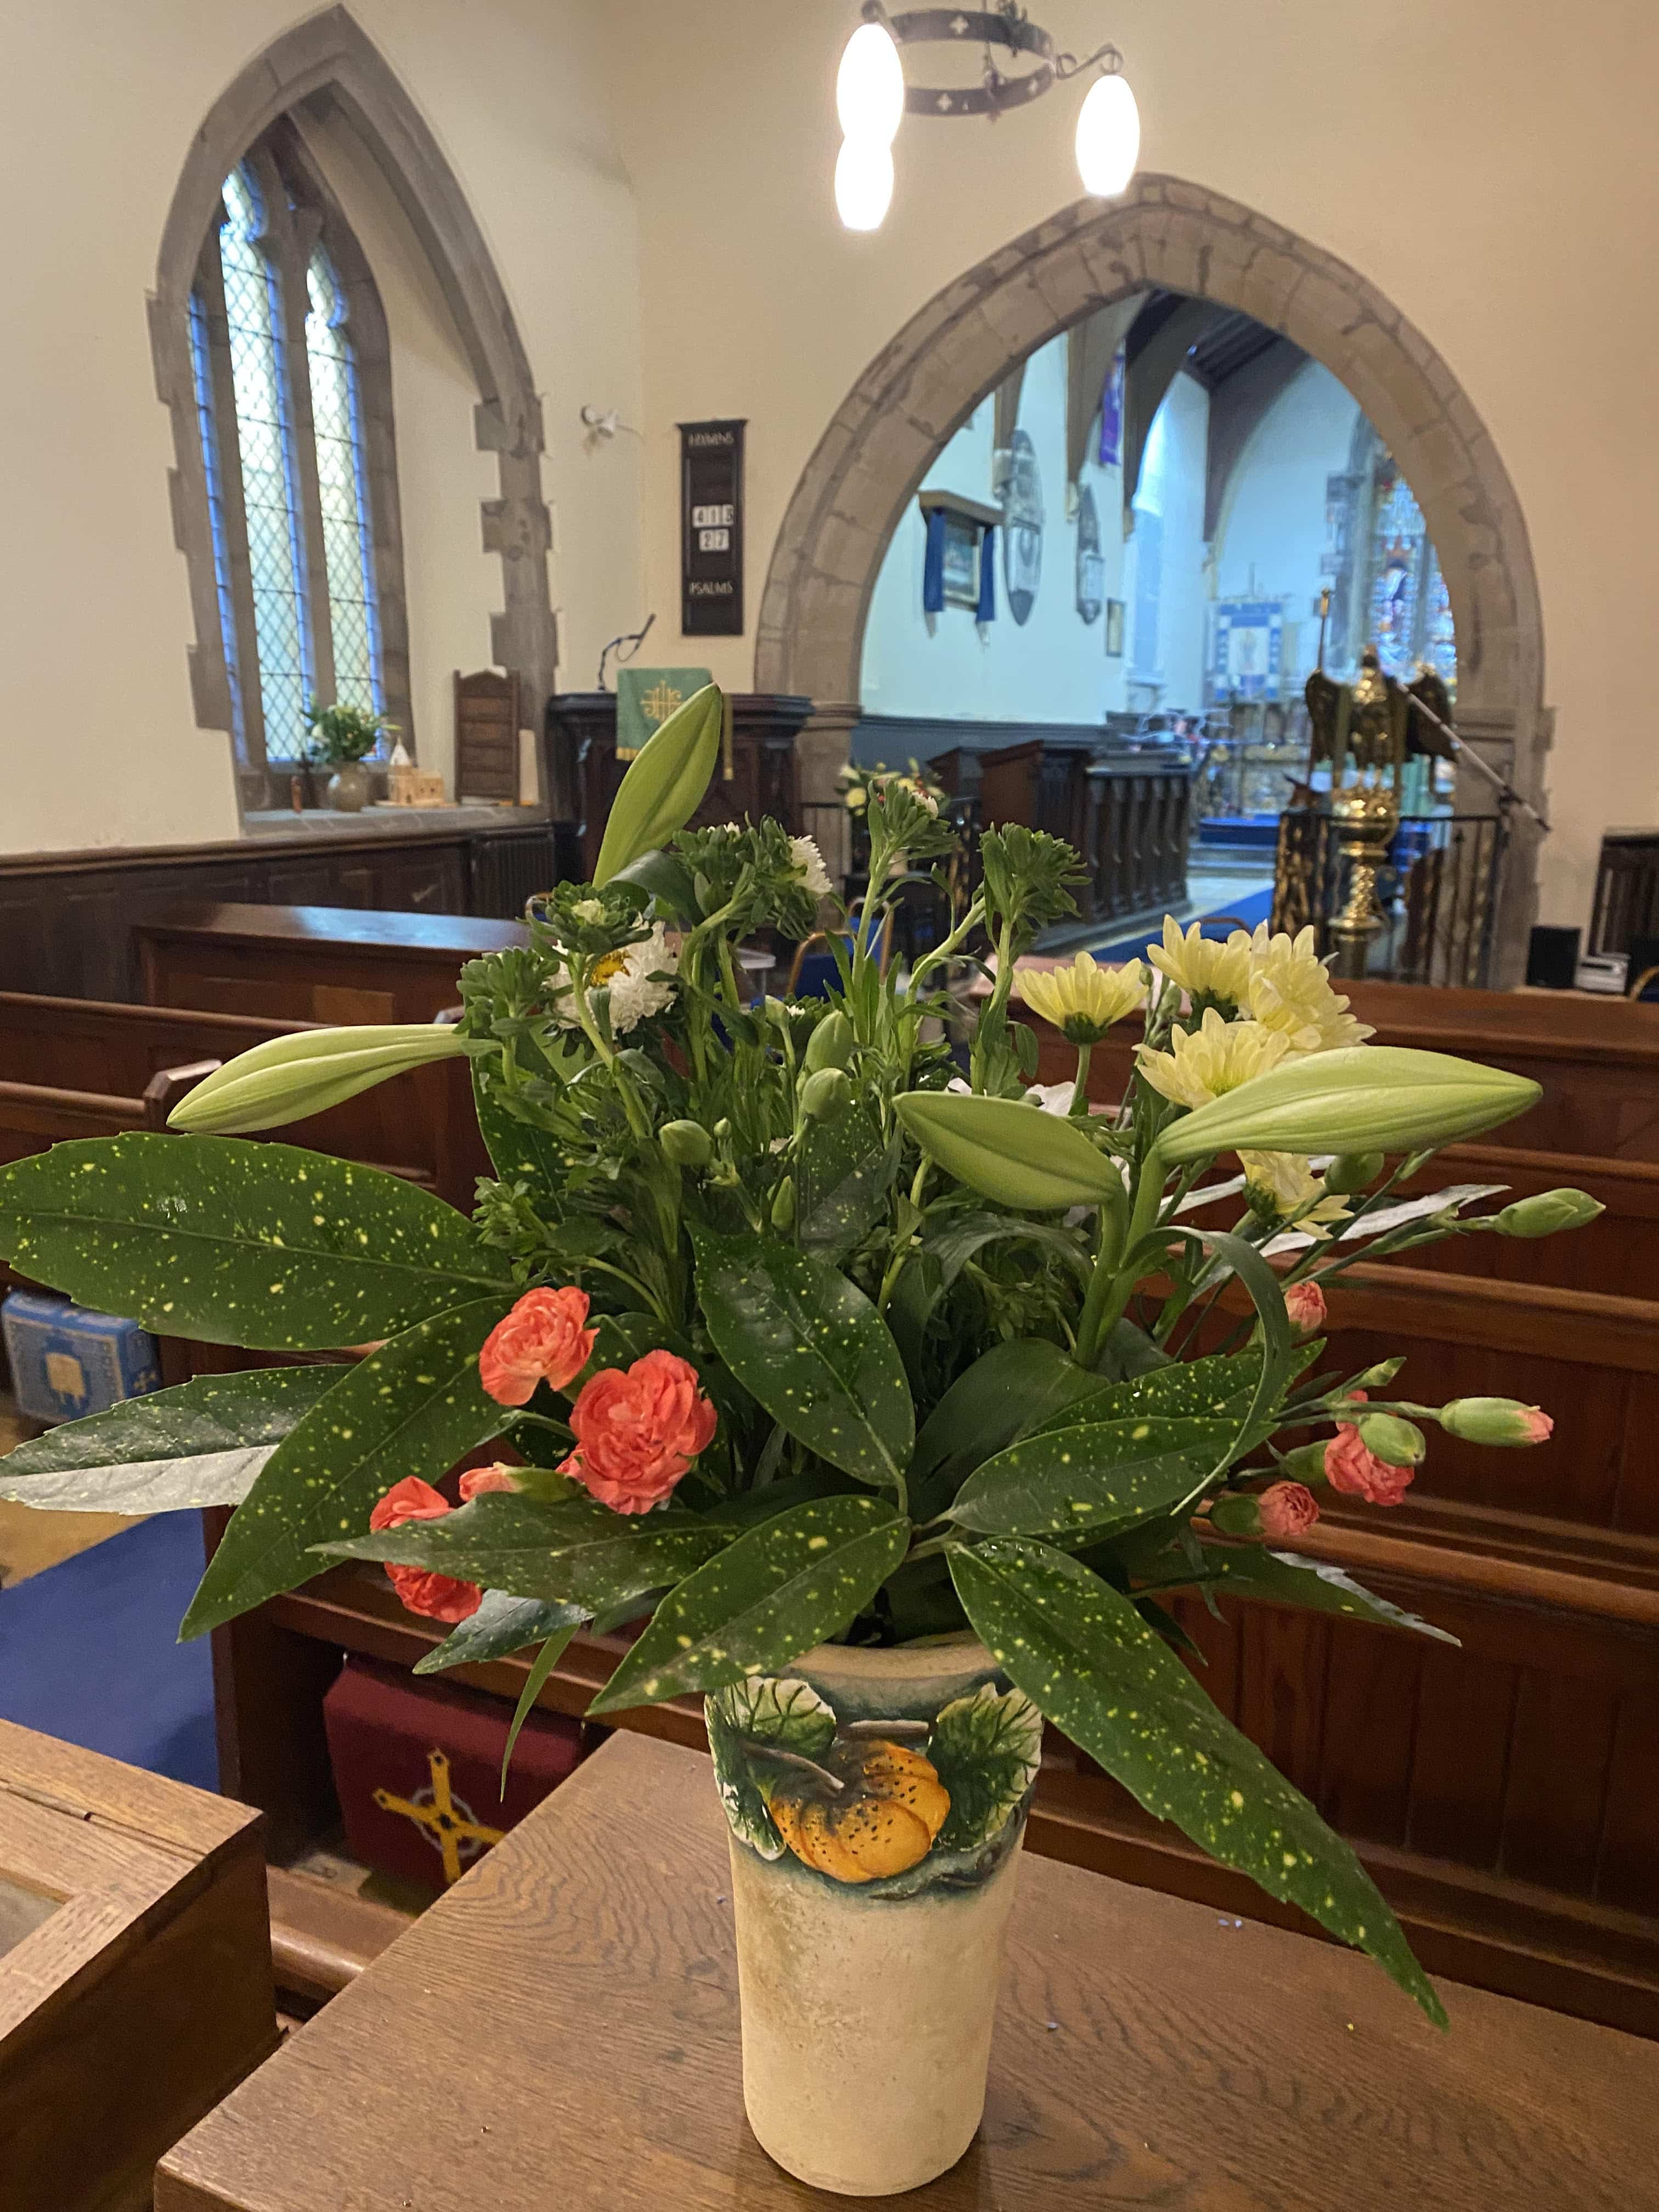 Featured image for “Harvest at St Michael and All Angels, Ravenstone (Bronze Eco Church)”